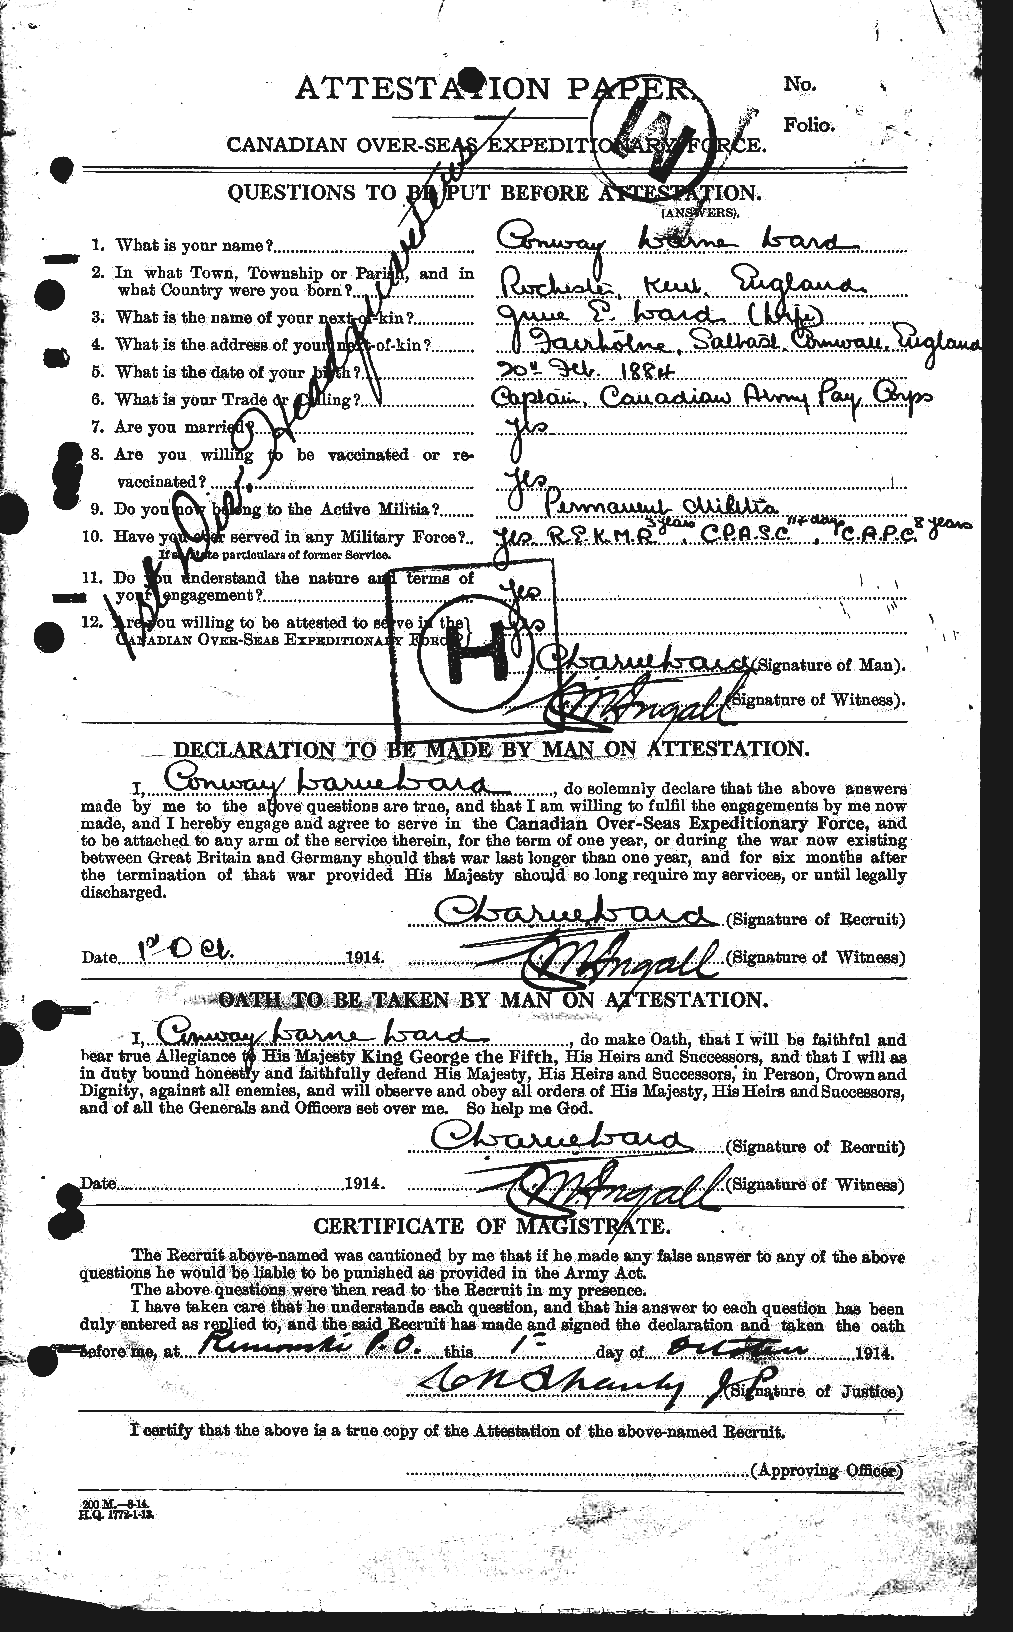 Personnel Records of the First World War - CEF 657612a